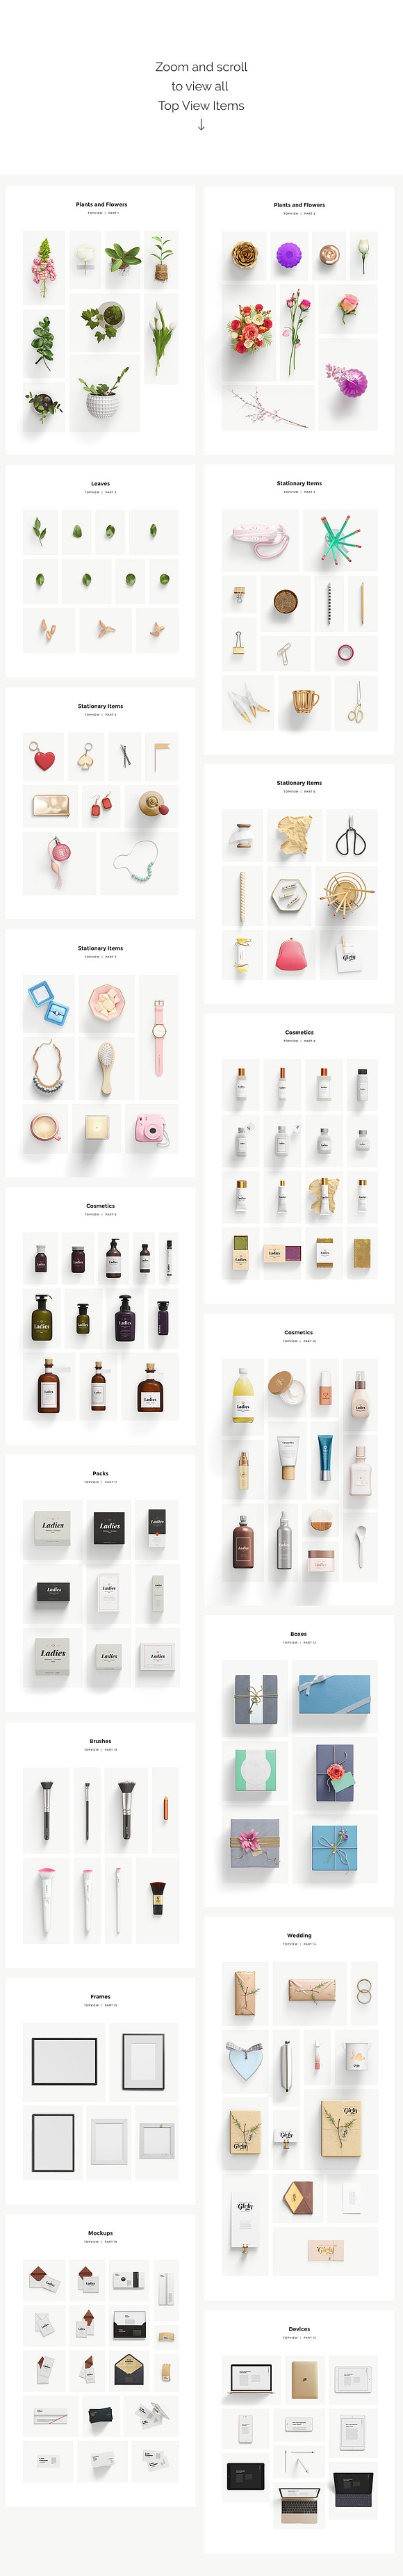 Beauty, Stationery, Wedding, Cosme.. in Mobile & Web Mockups - product preview 8